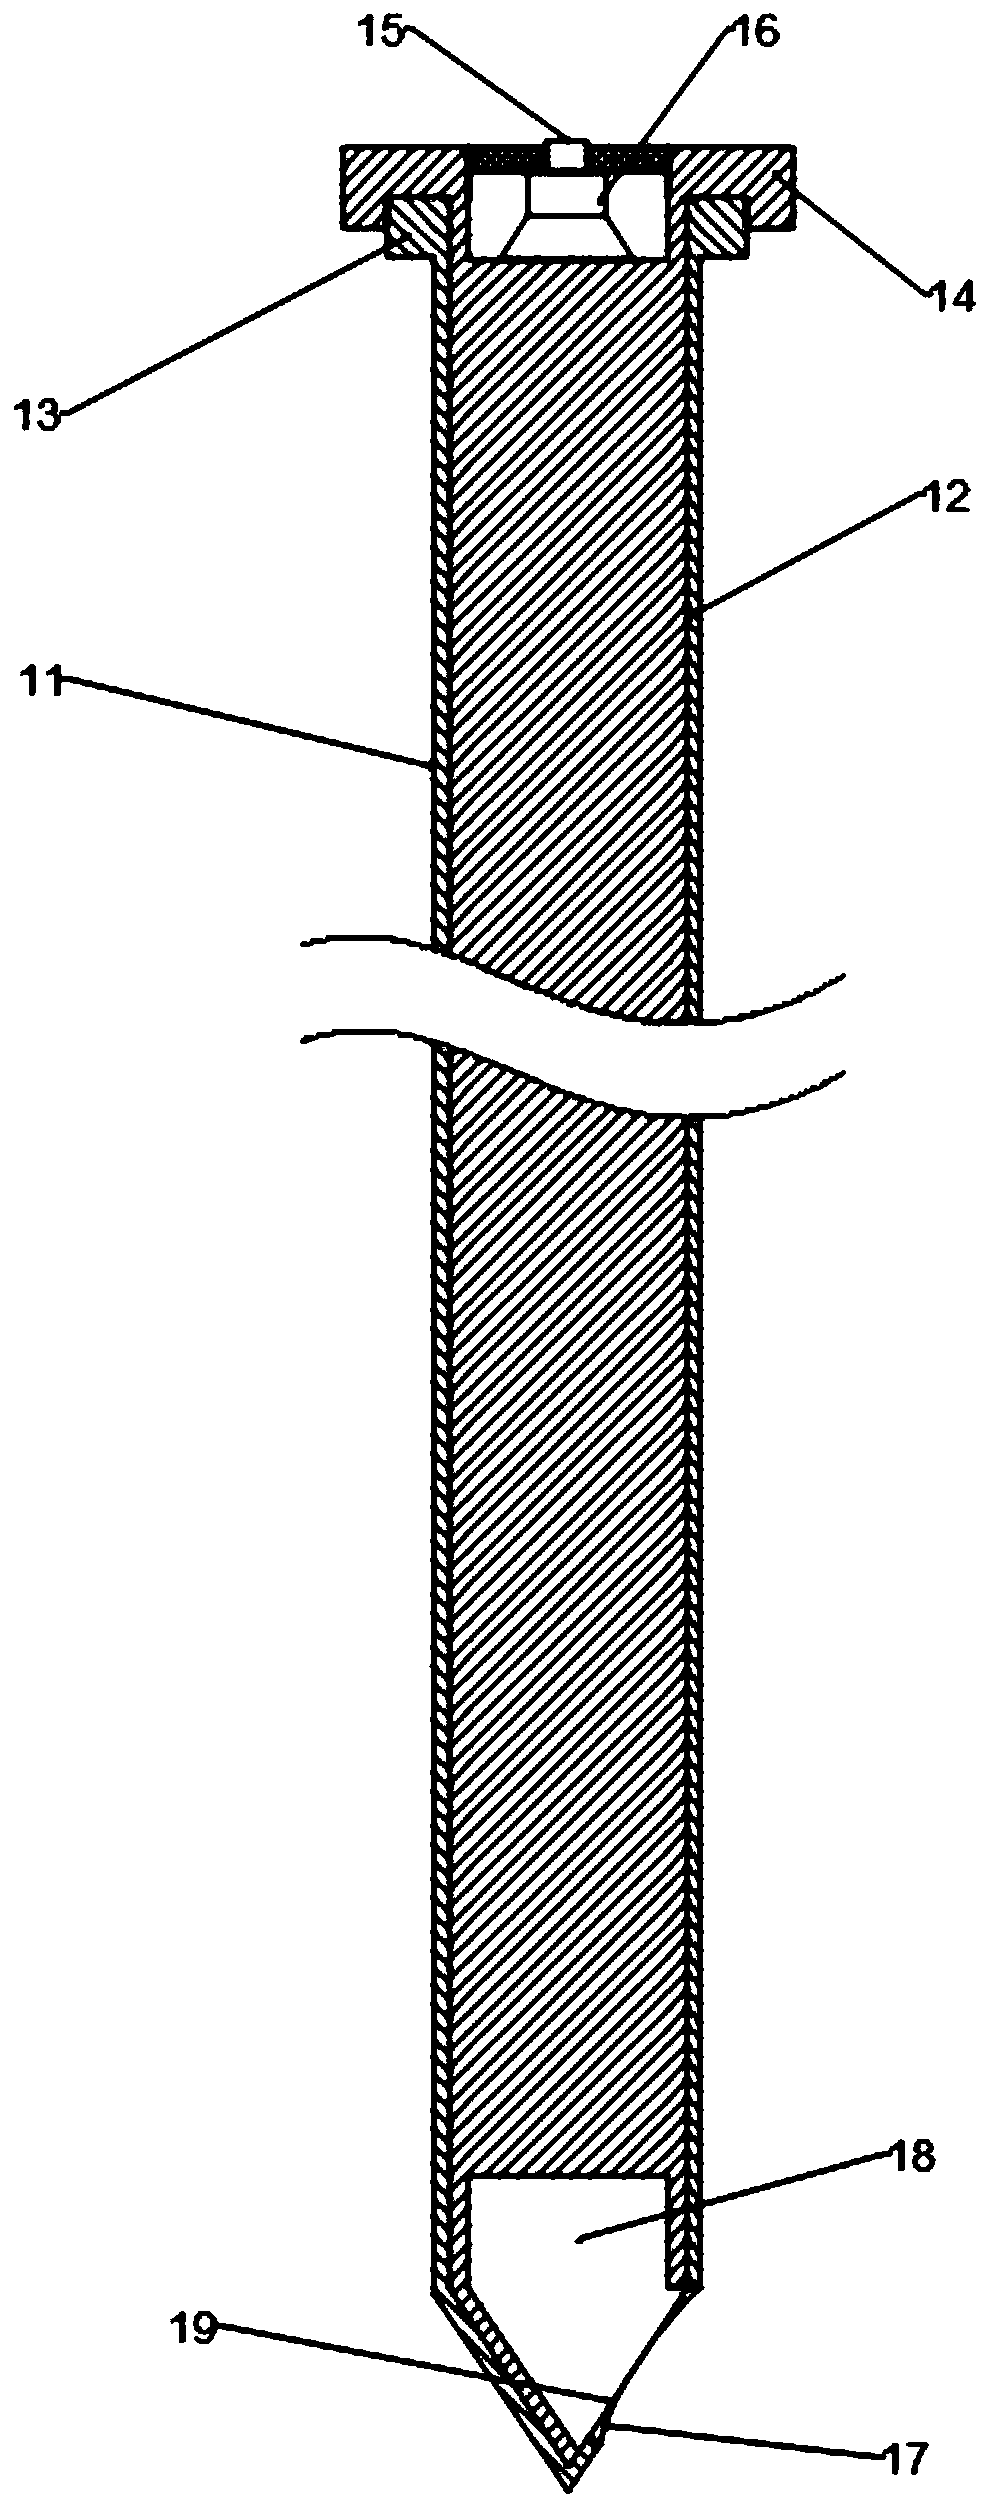 Method for performing single-needle or multi-needle puncture biopsy through laser guide